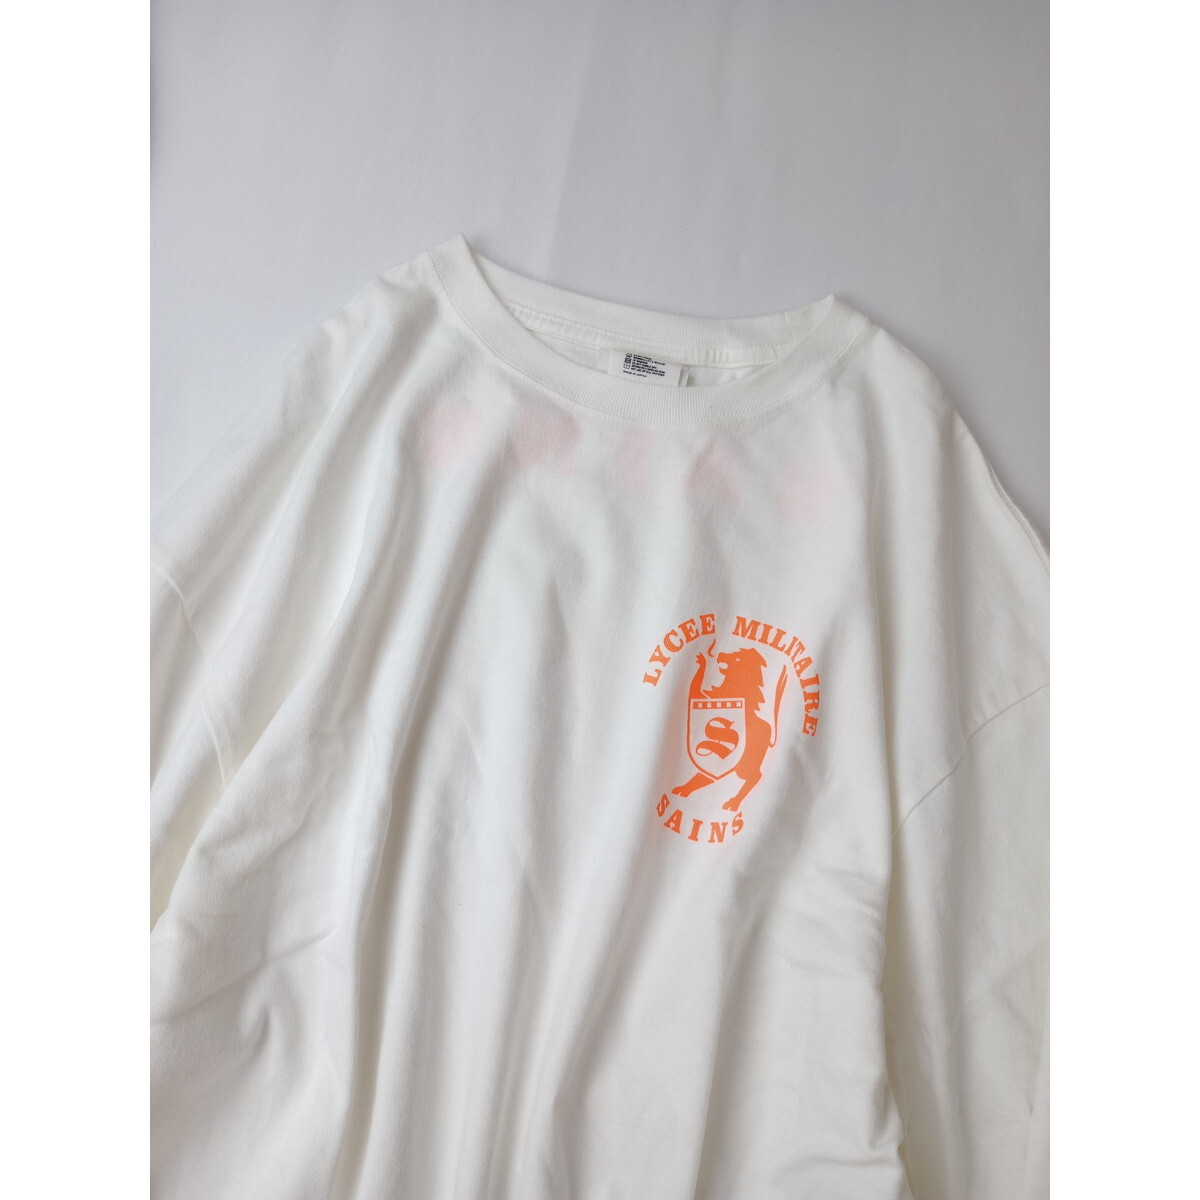 22AW THE SHINZONEsin Zone ATHLETIC LONG TEEa attrition сhick long T cut and sewn tops long sleeve white orange 